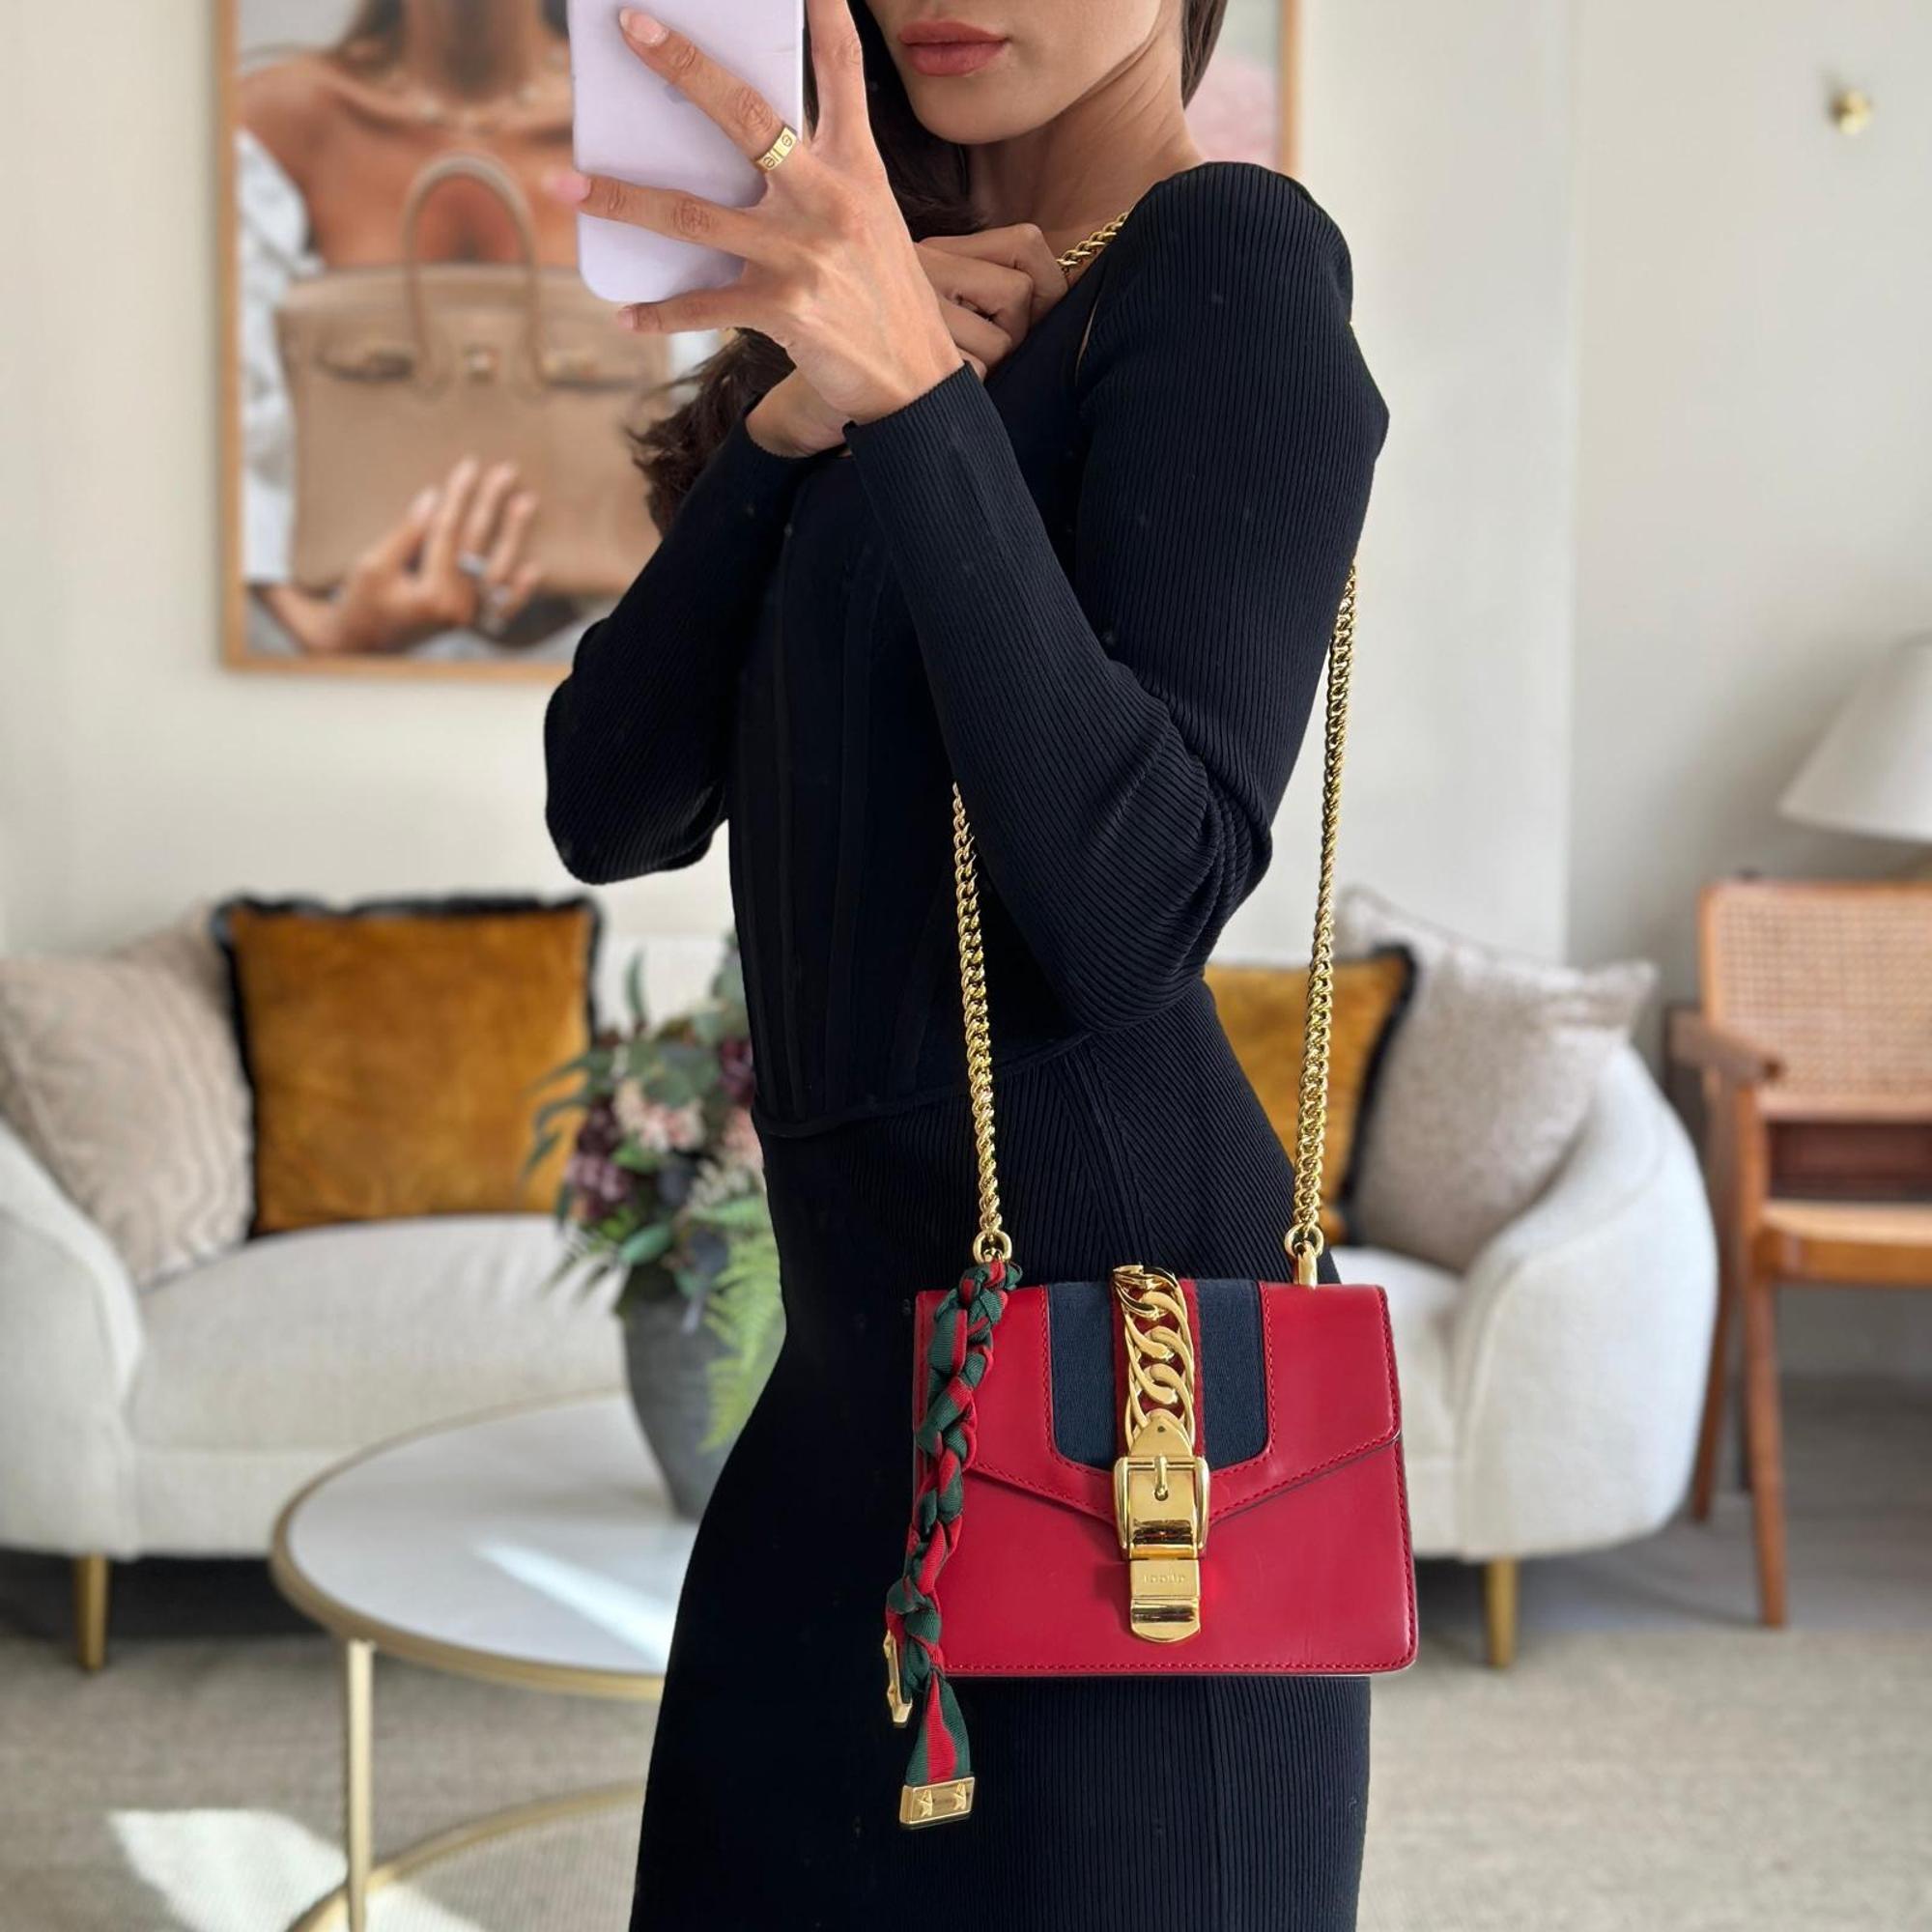 Gucci Red Leather Small Sylvie Bag Canvas With Gold Hardware